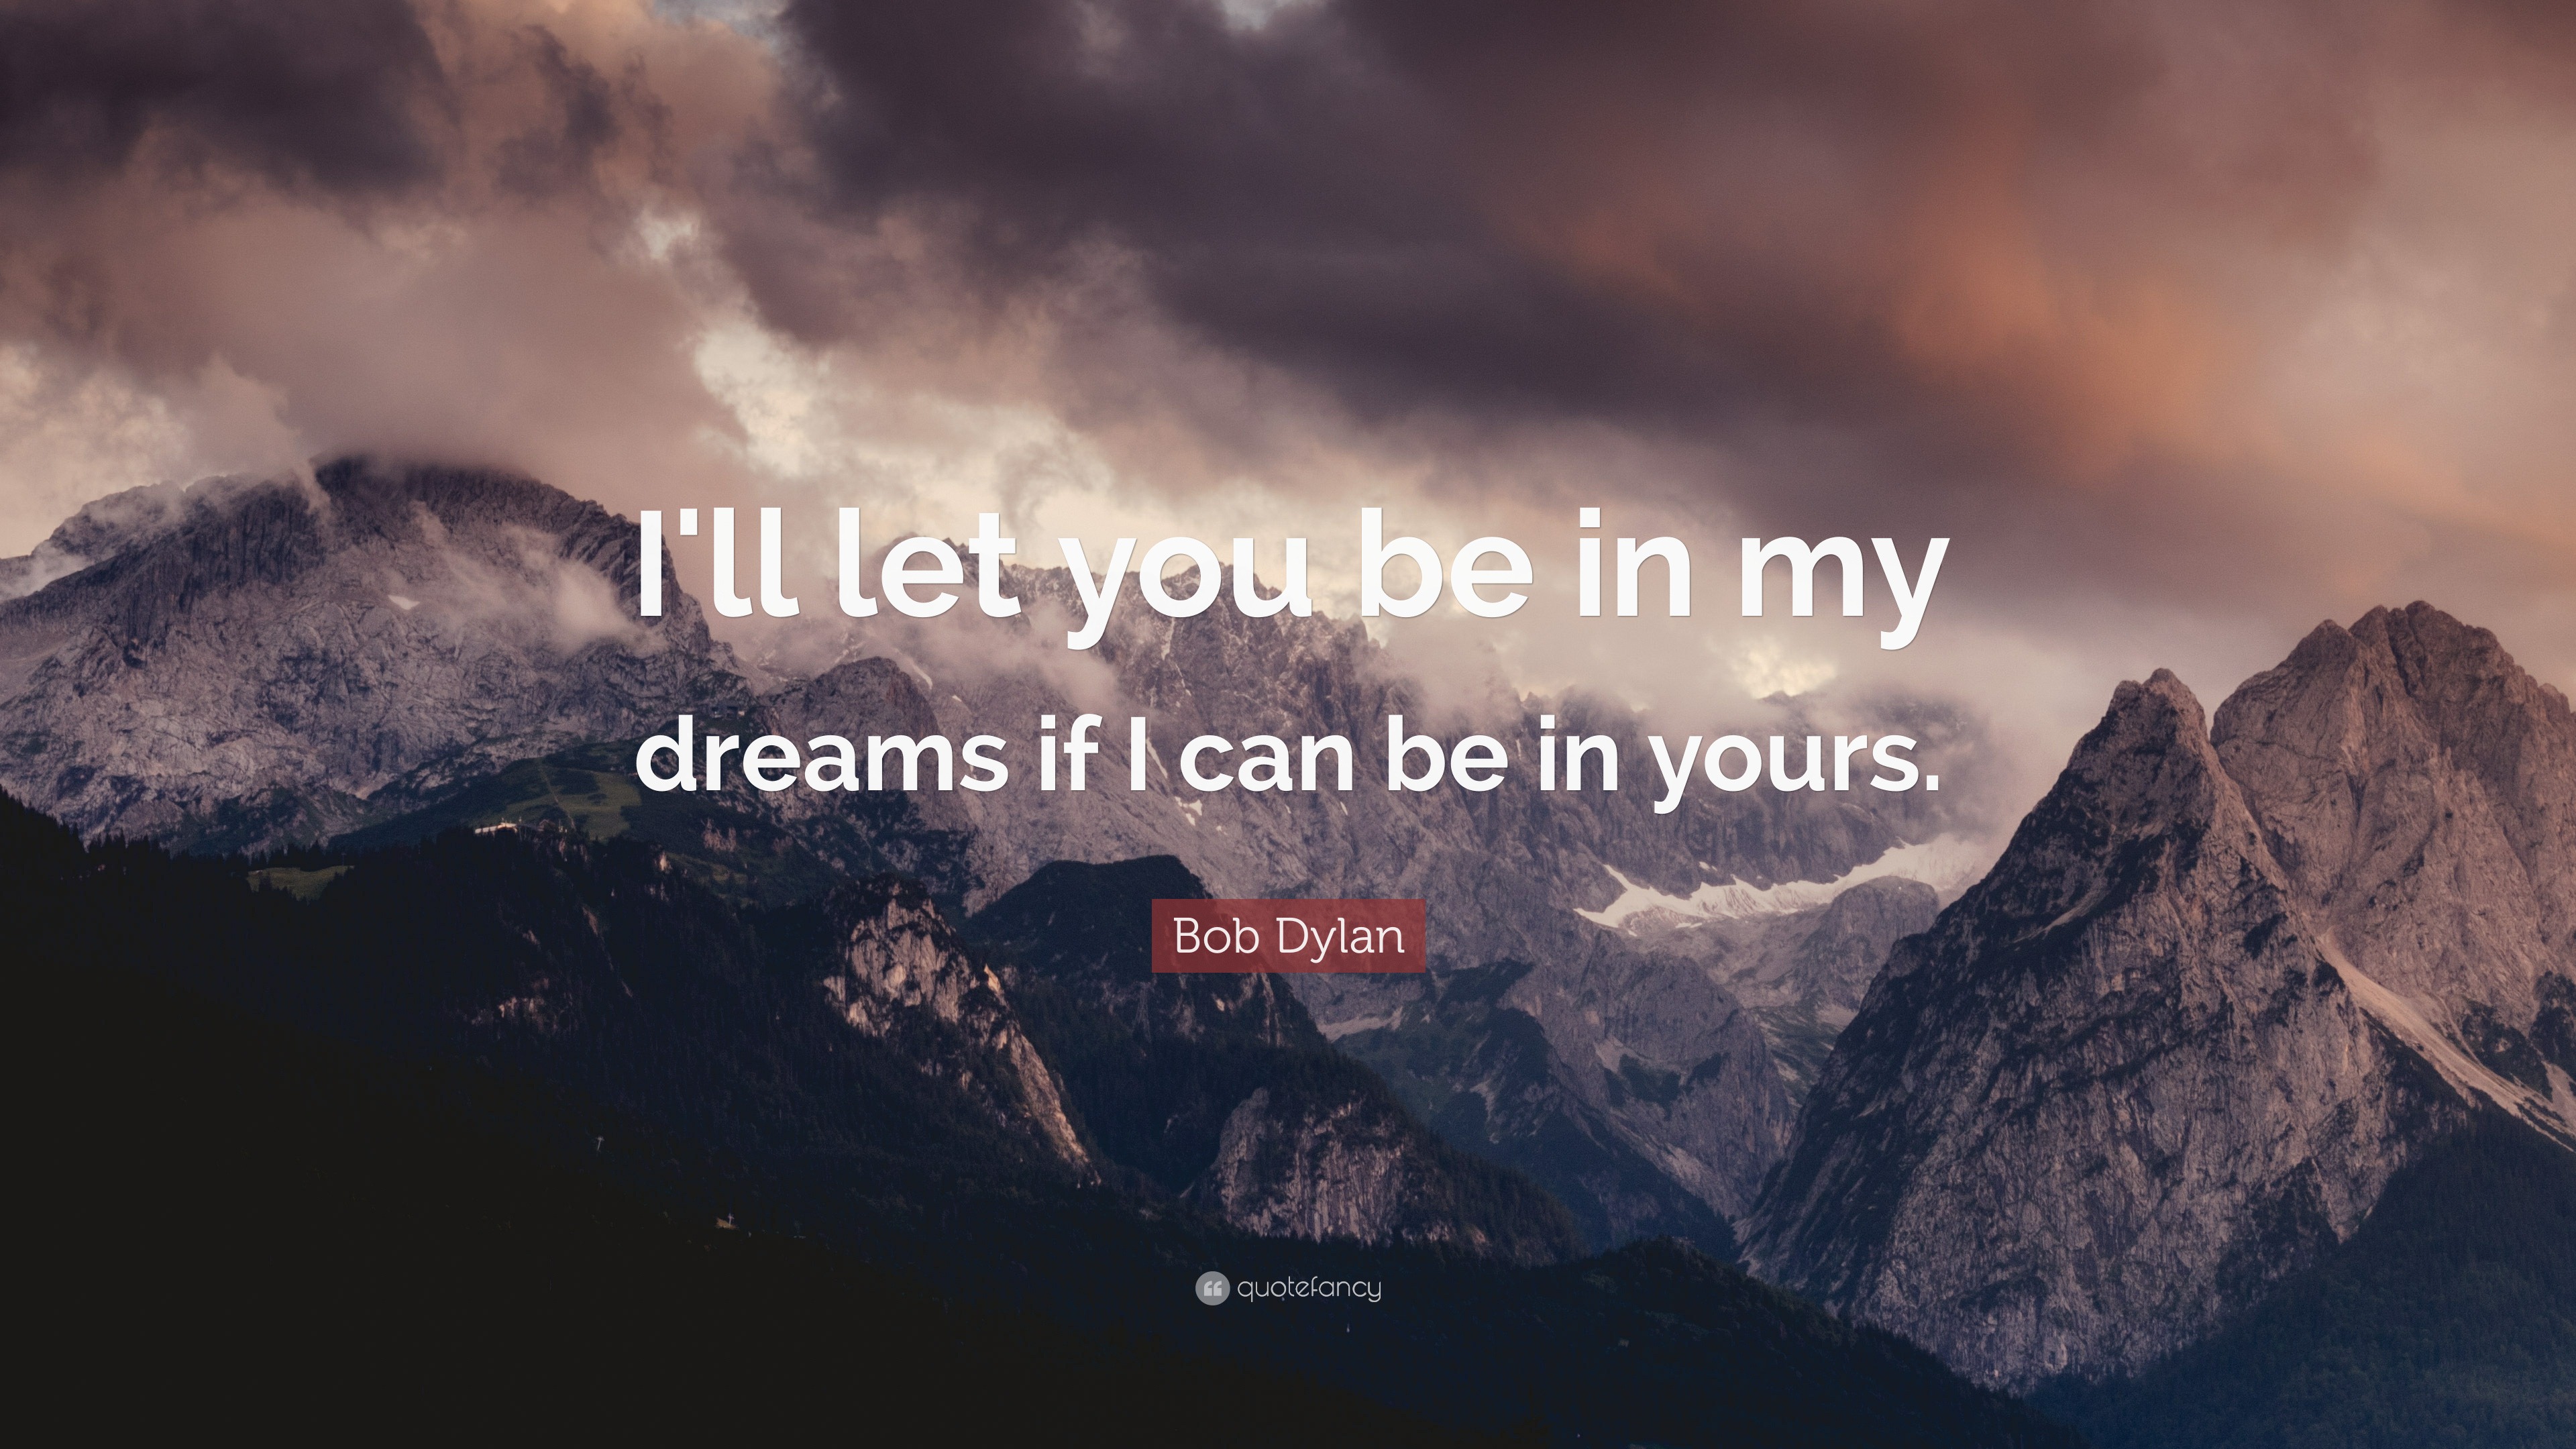 Bob Dylan Quote “ill Let You Be In My Dreams If I Can Be In Yours”